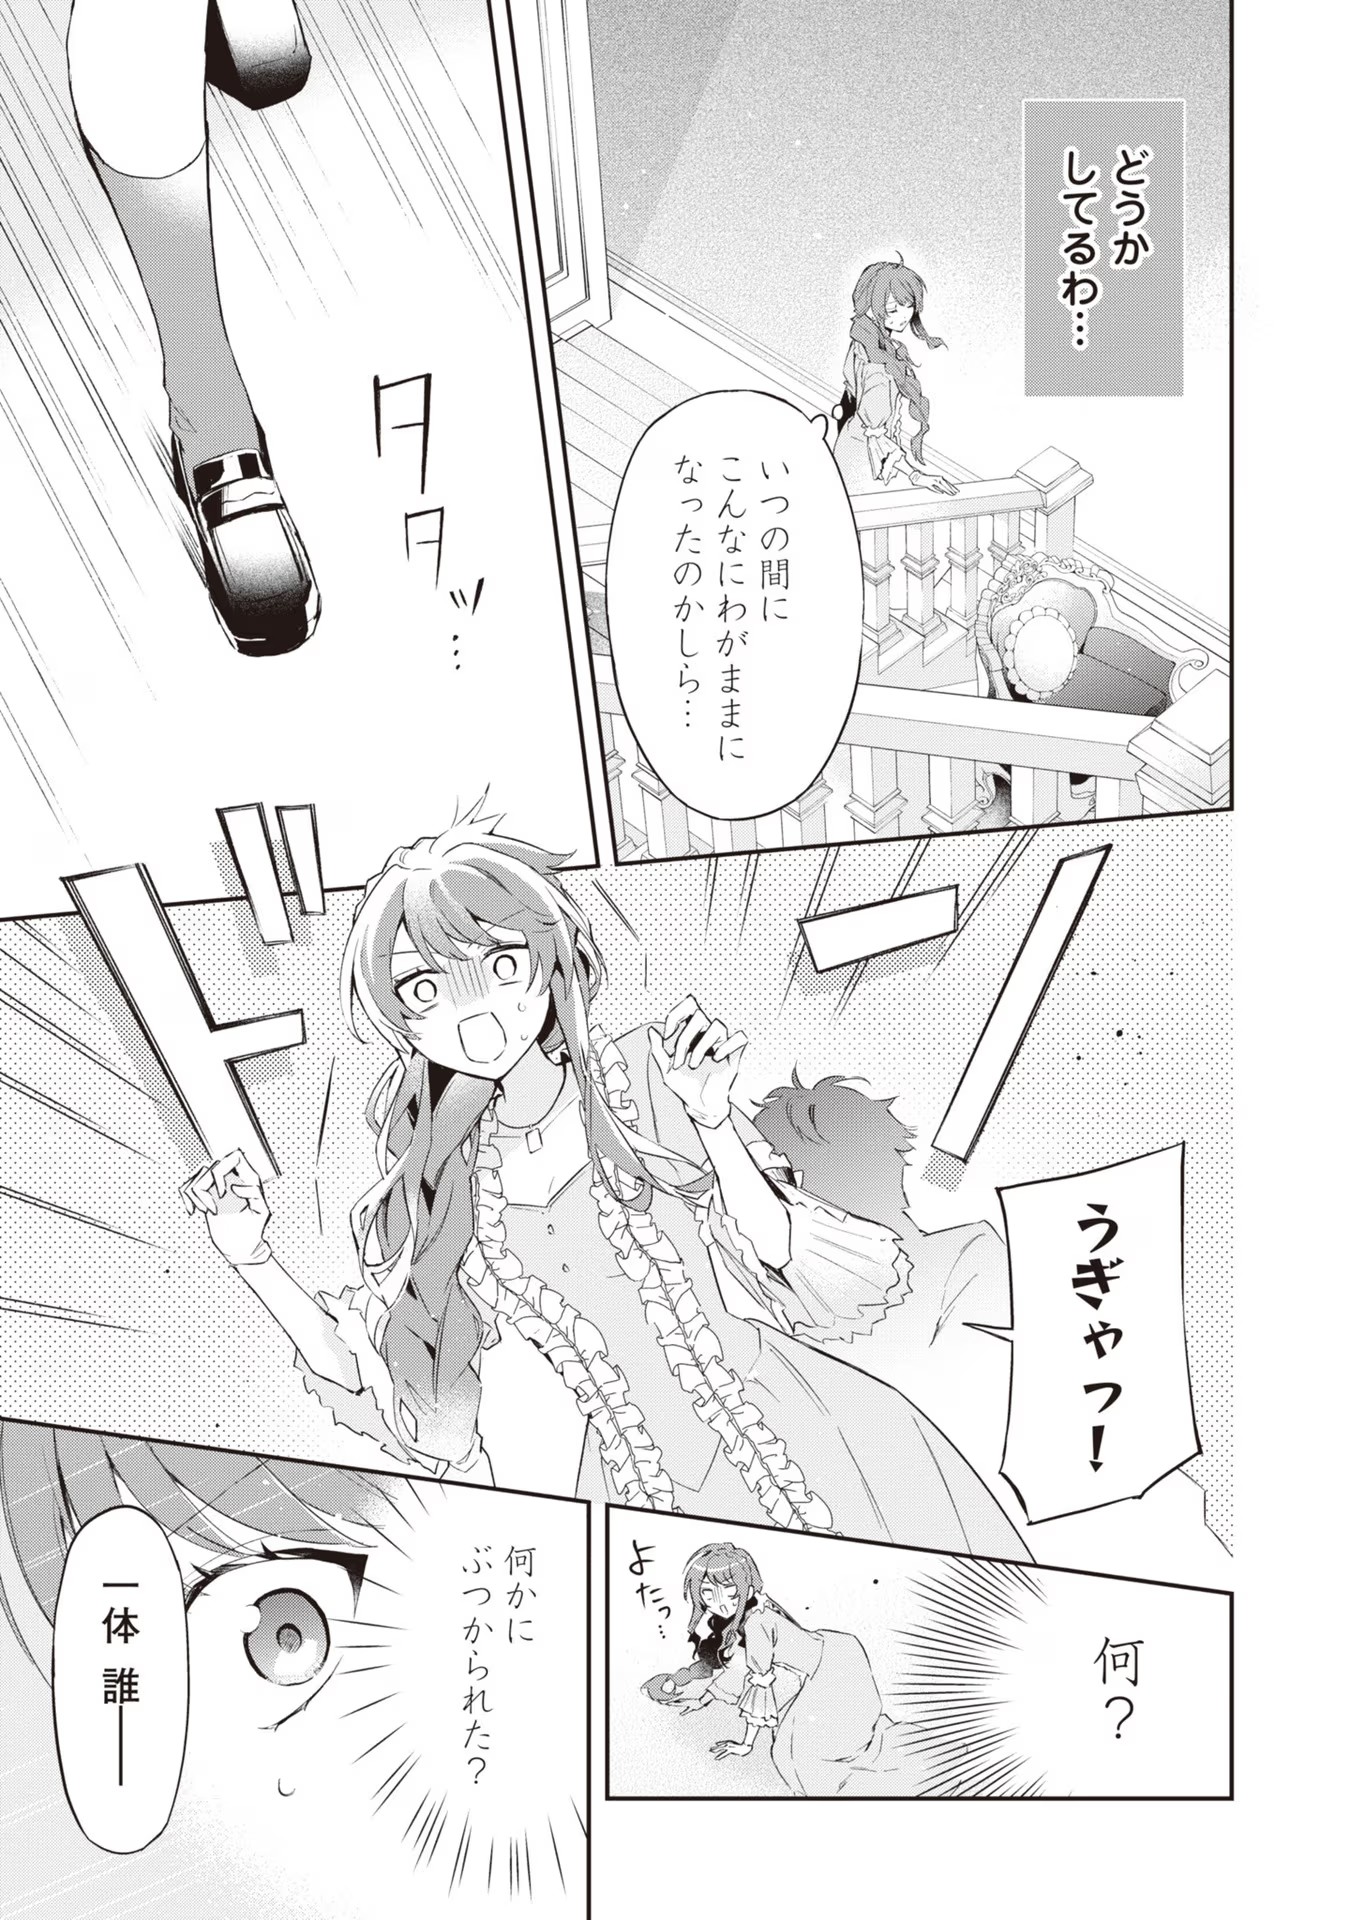 Kyou mo Reisoku to Kisoiatte Iru you desu If the Villainess and the Villain Were to Meet and Fall in Love ~It Seems the Shunned Heroine Who Formed a Contract With an Unnamed Spirit Is Fighting With the Nobleman Yet Again~ If the Villainess and Villain Met 第15話 - Page 27